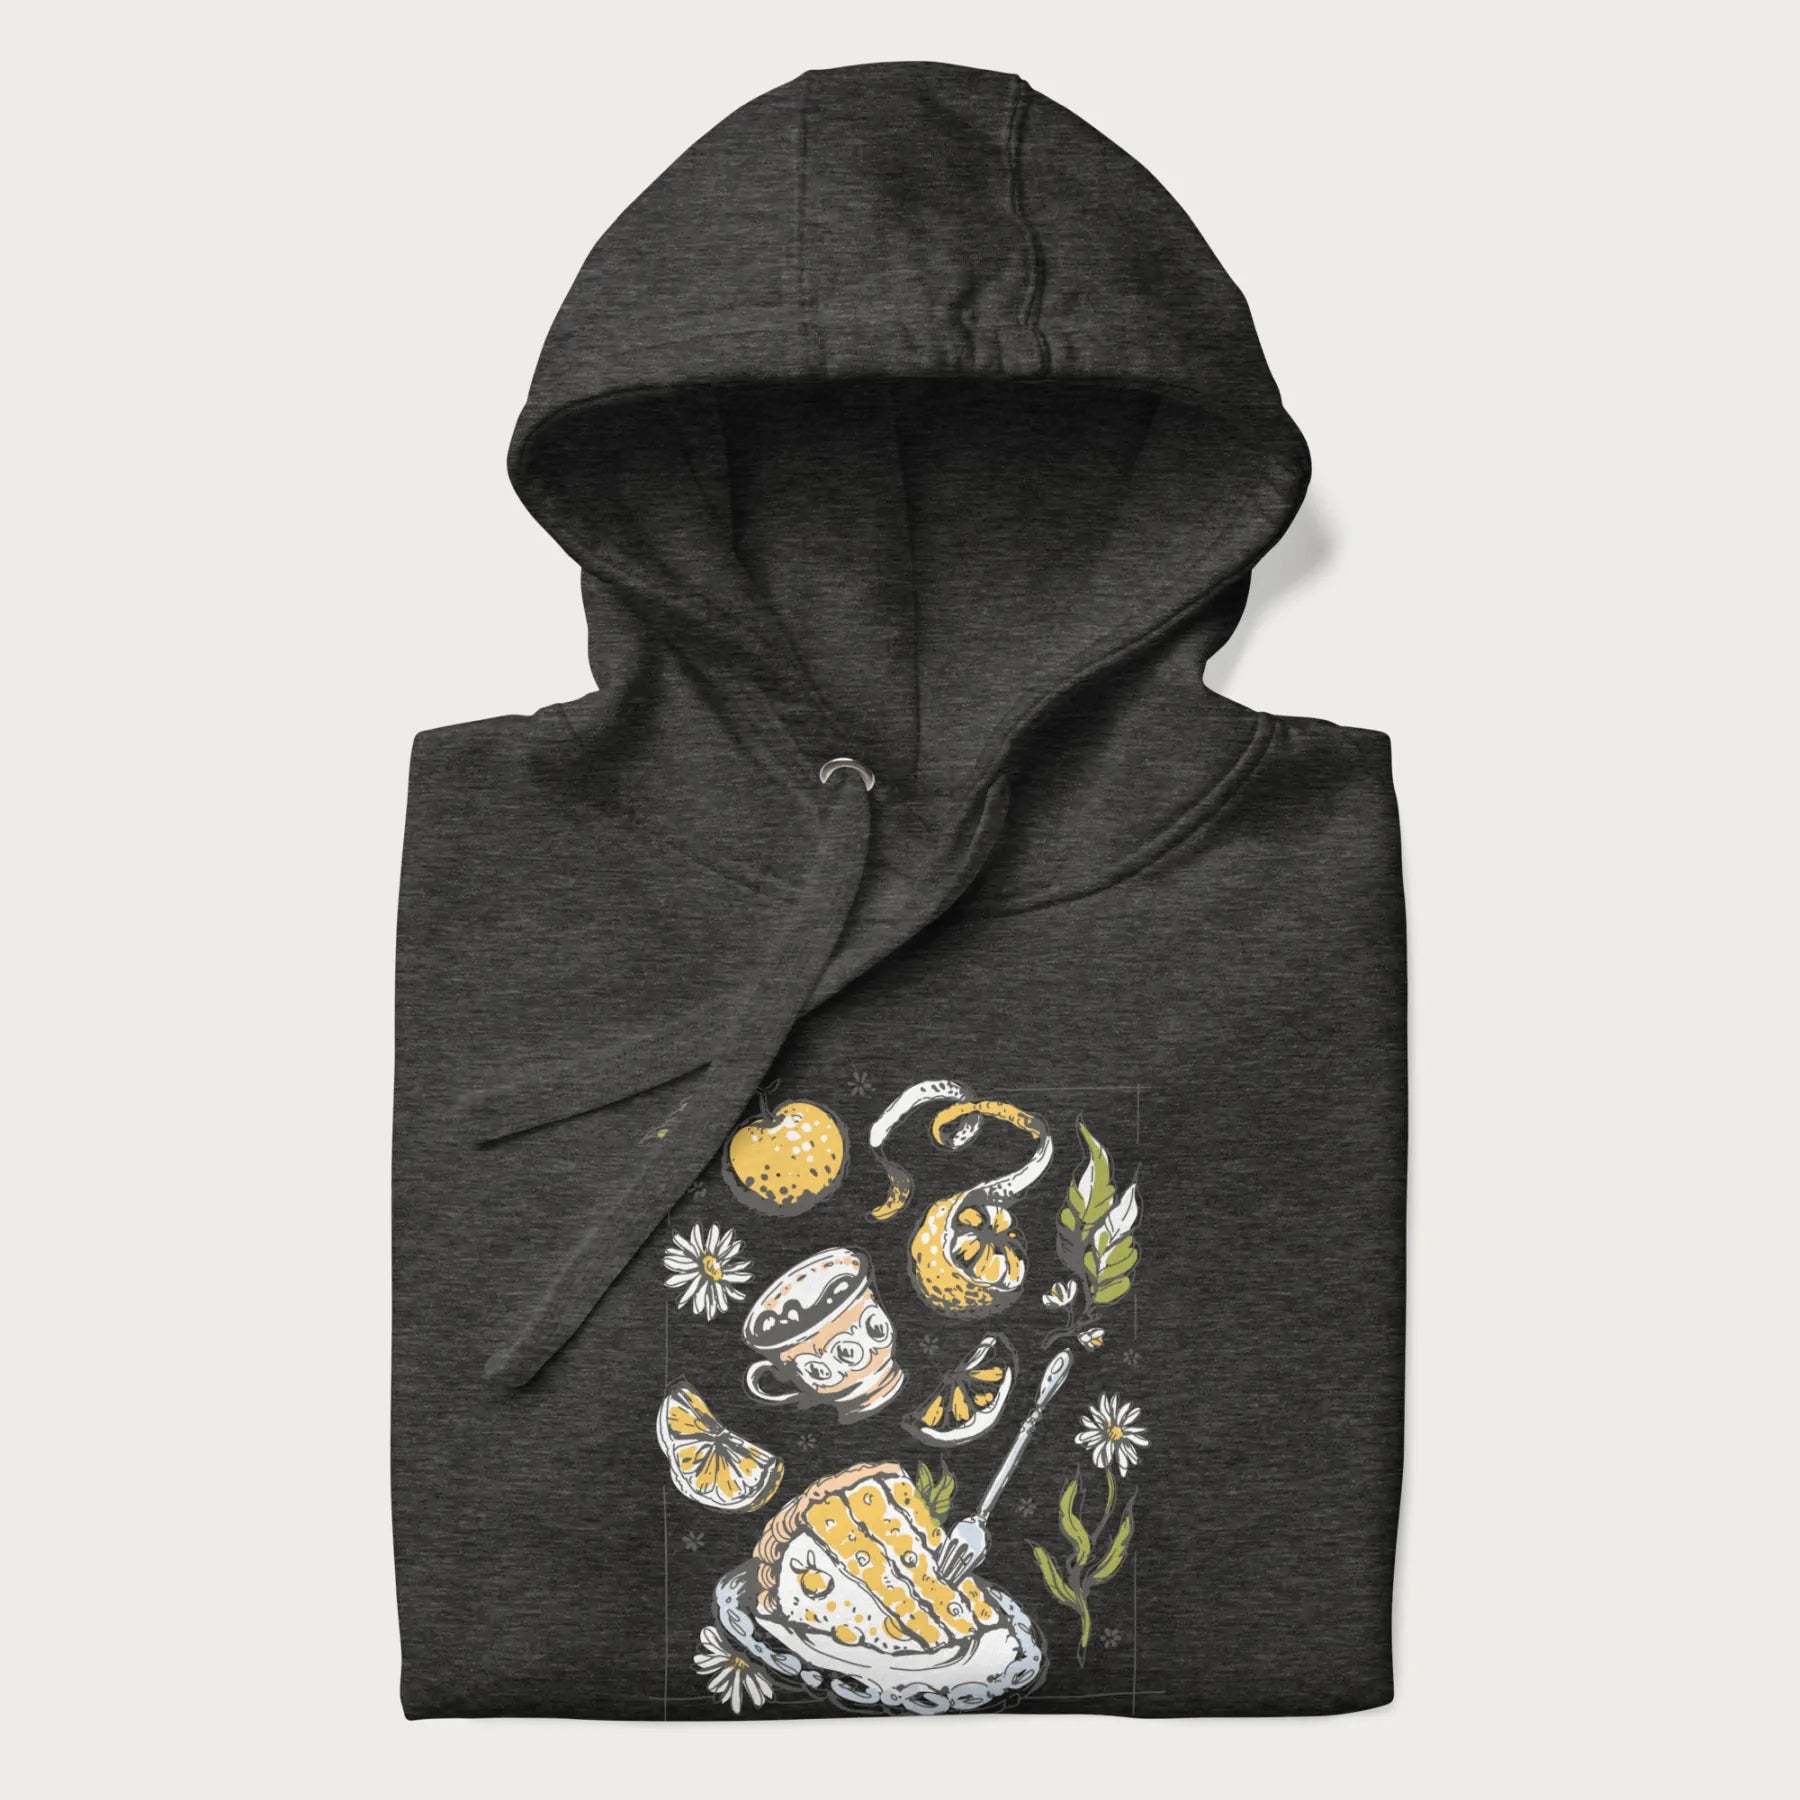 Folded dark grey hoodie featuring a Cottagecore-themed graphic with oranges, a floral porcelain cup, orange pie, and daisies.